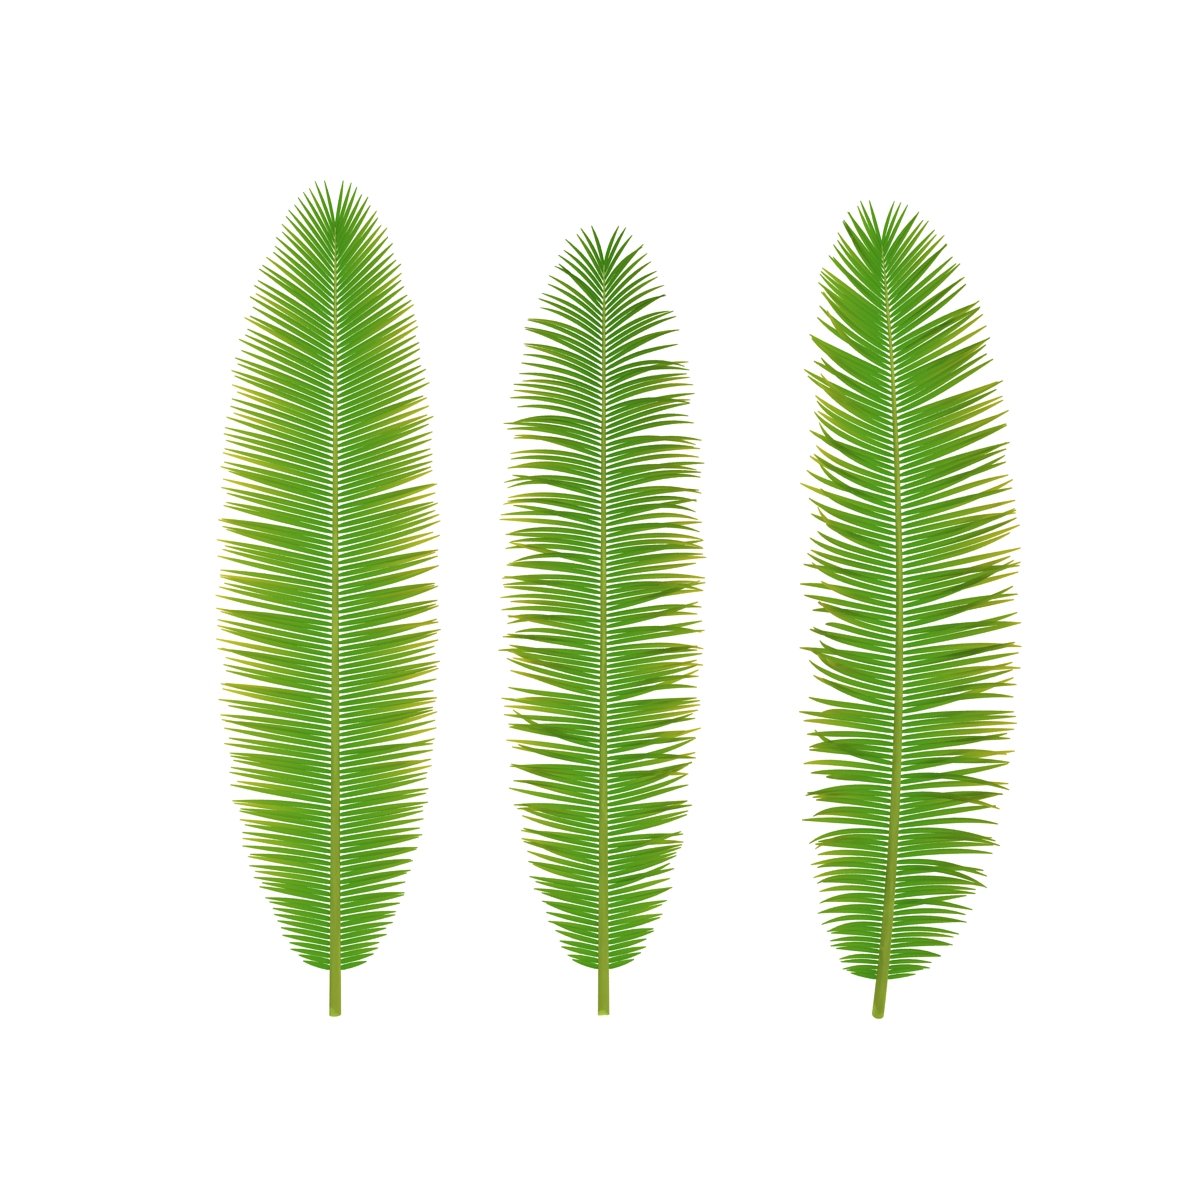 Three different types of green leaves on a white background.